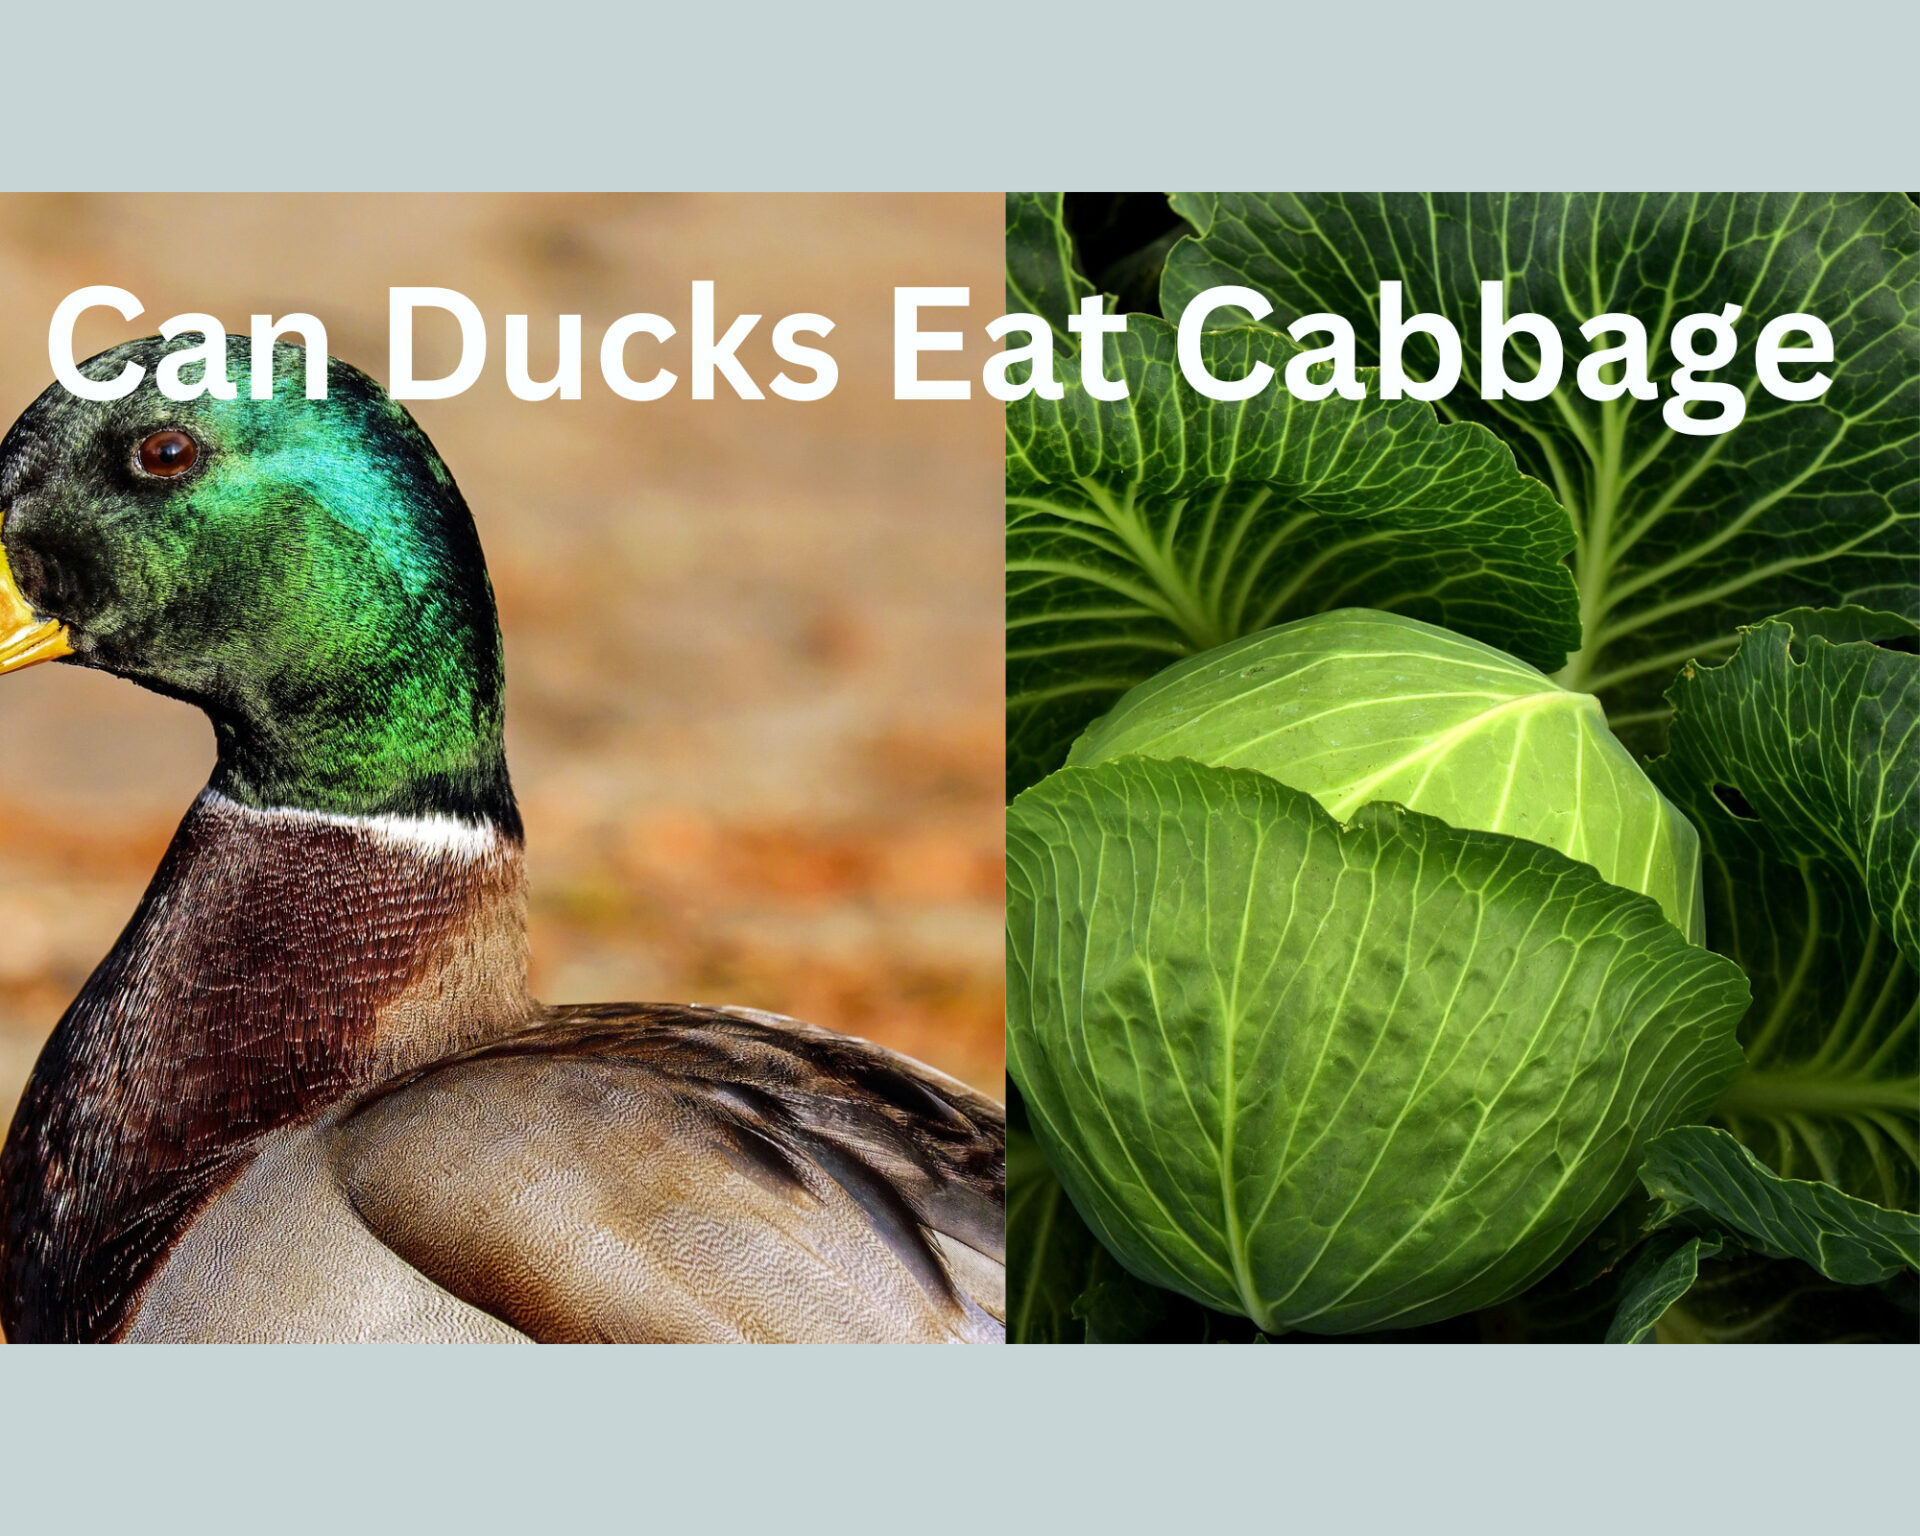 Can Ducks Eat Cabbage? (Answered)